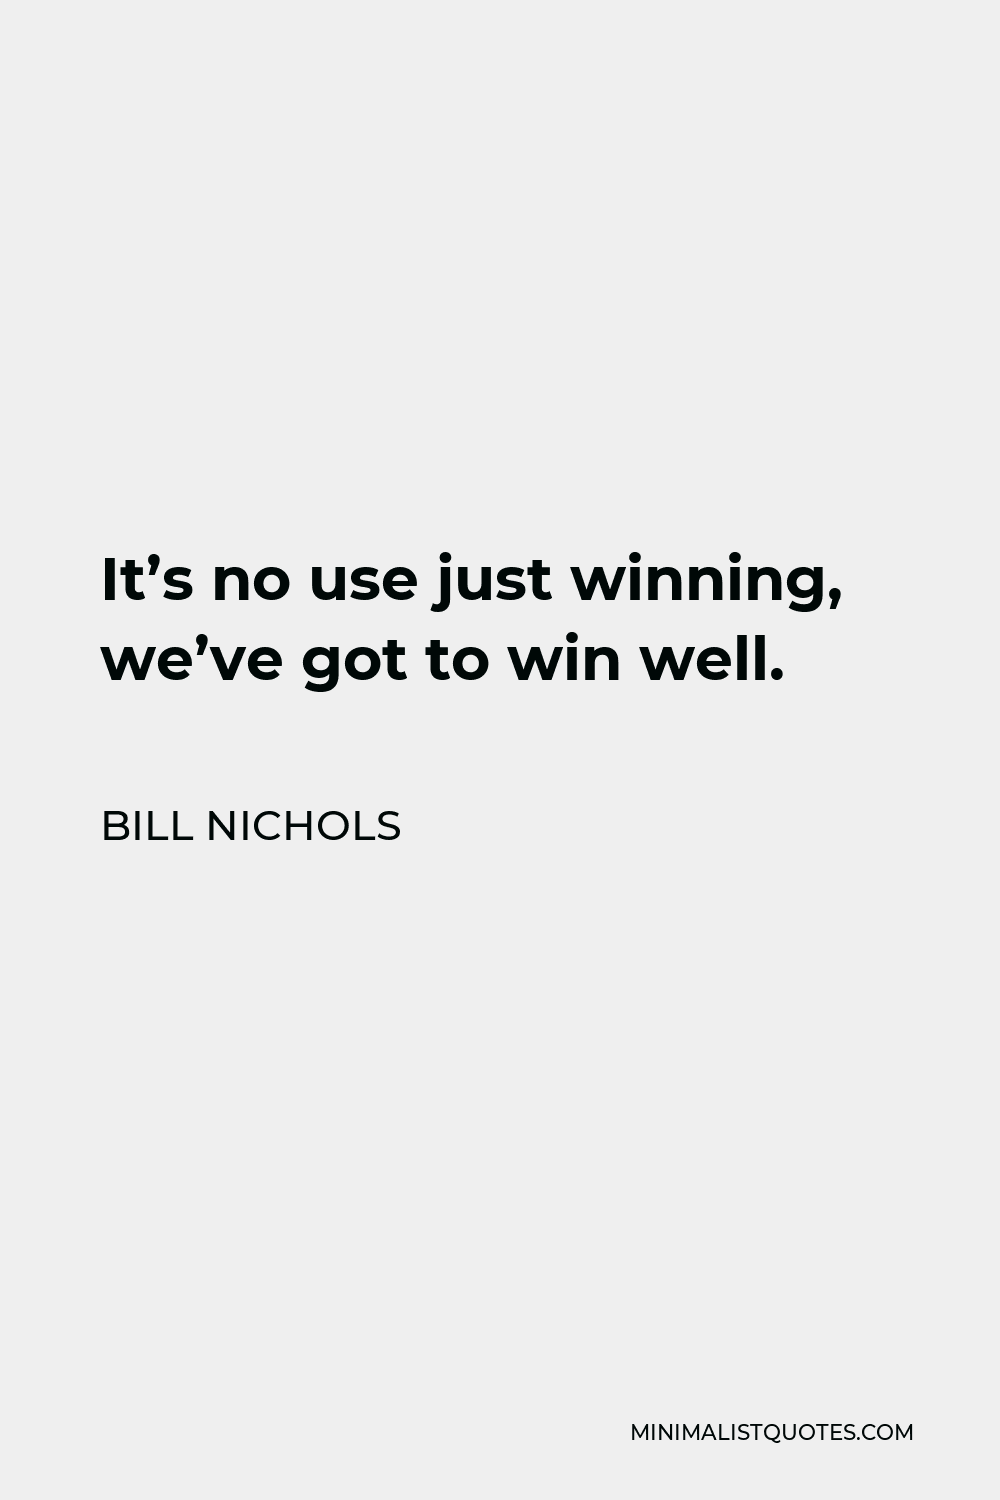 Bill Nichols Quote - It’s no use just winning, we’ve got to win well.